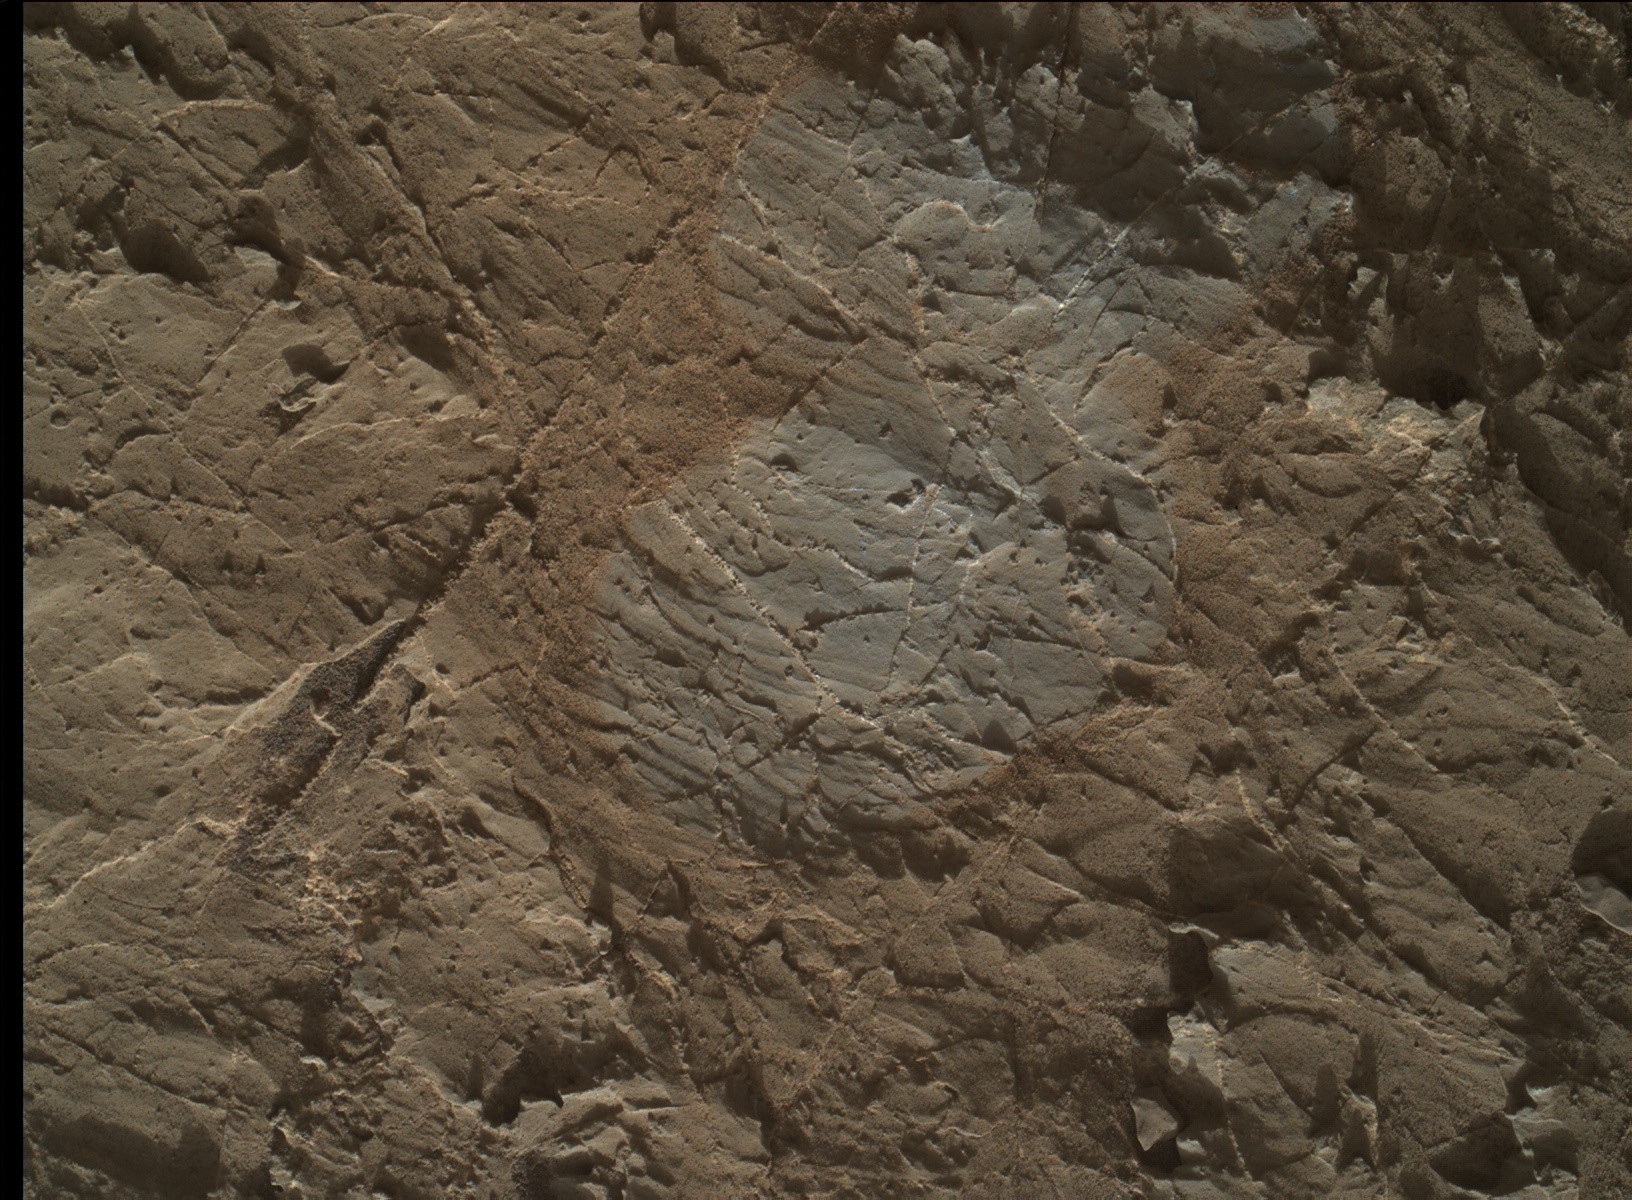 Nasa's Mars rover Curiosity acquired this image using its Mars Hand Lens Imager (MAHLI) on Sol 1966